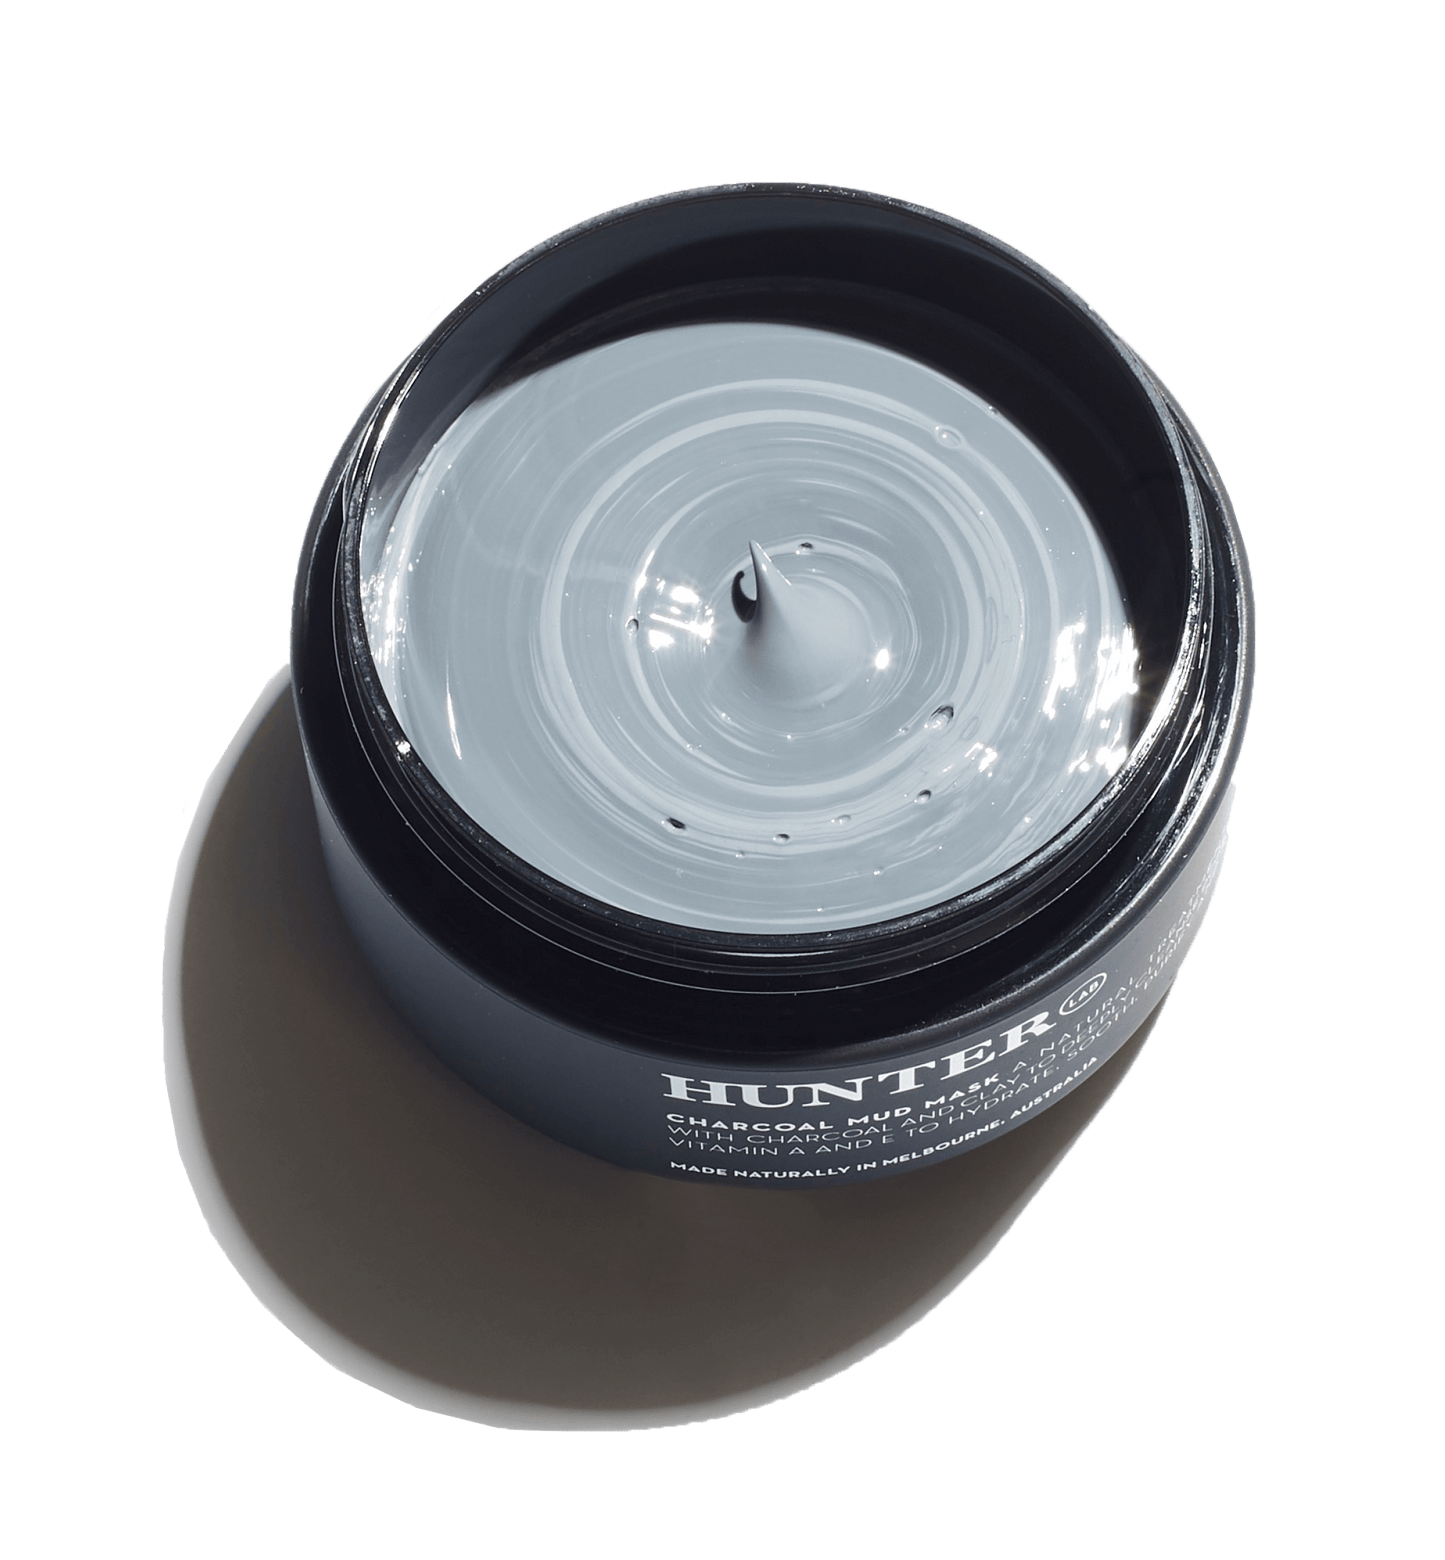 
                  
                    Charcoal Mud Mask | 65g A natural high performance treatment mask crafted with Charcoal and Bentonite and Kaoline Clay to deeply cleanse pores and remove impurities, and Aloe Vera, Vitamin A and E to hydrate, sooth and nourish skin.
                  
                